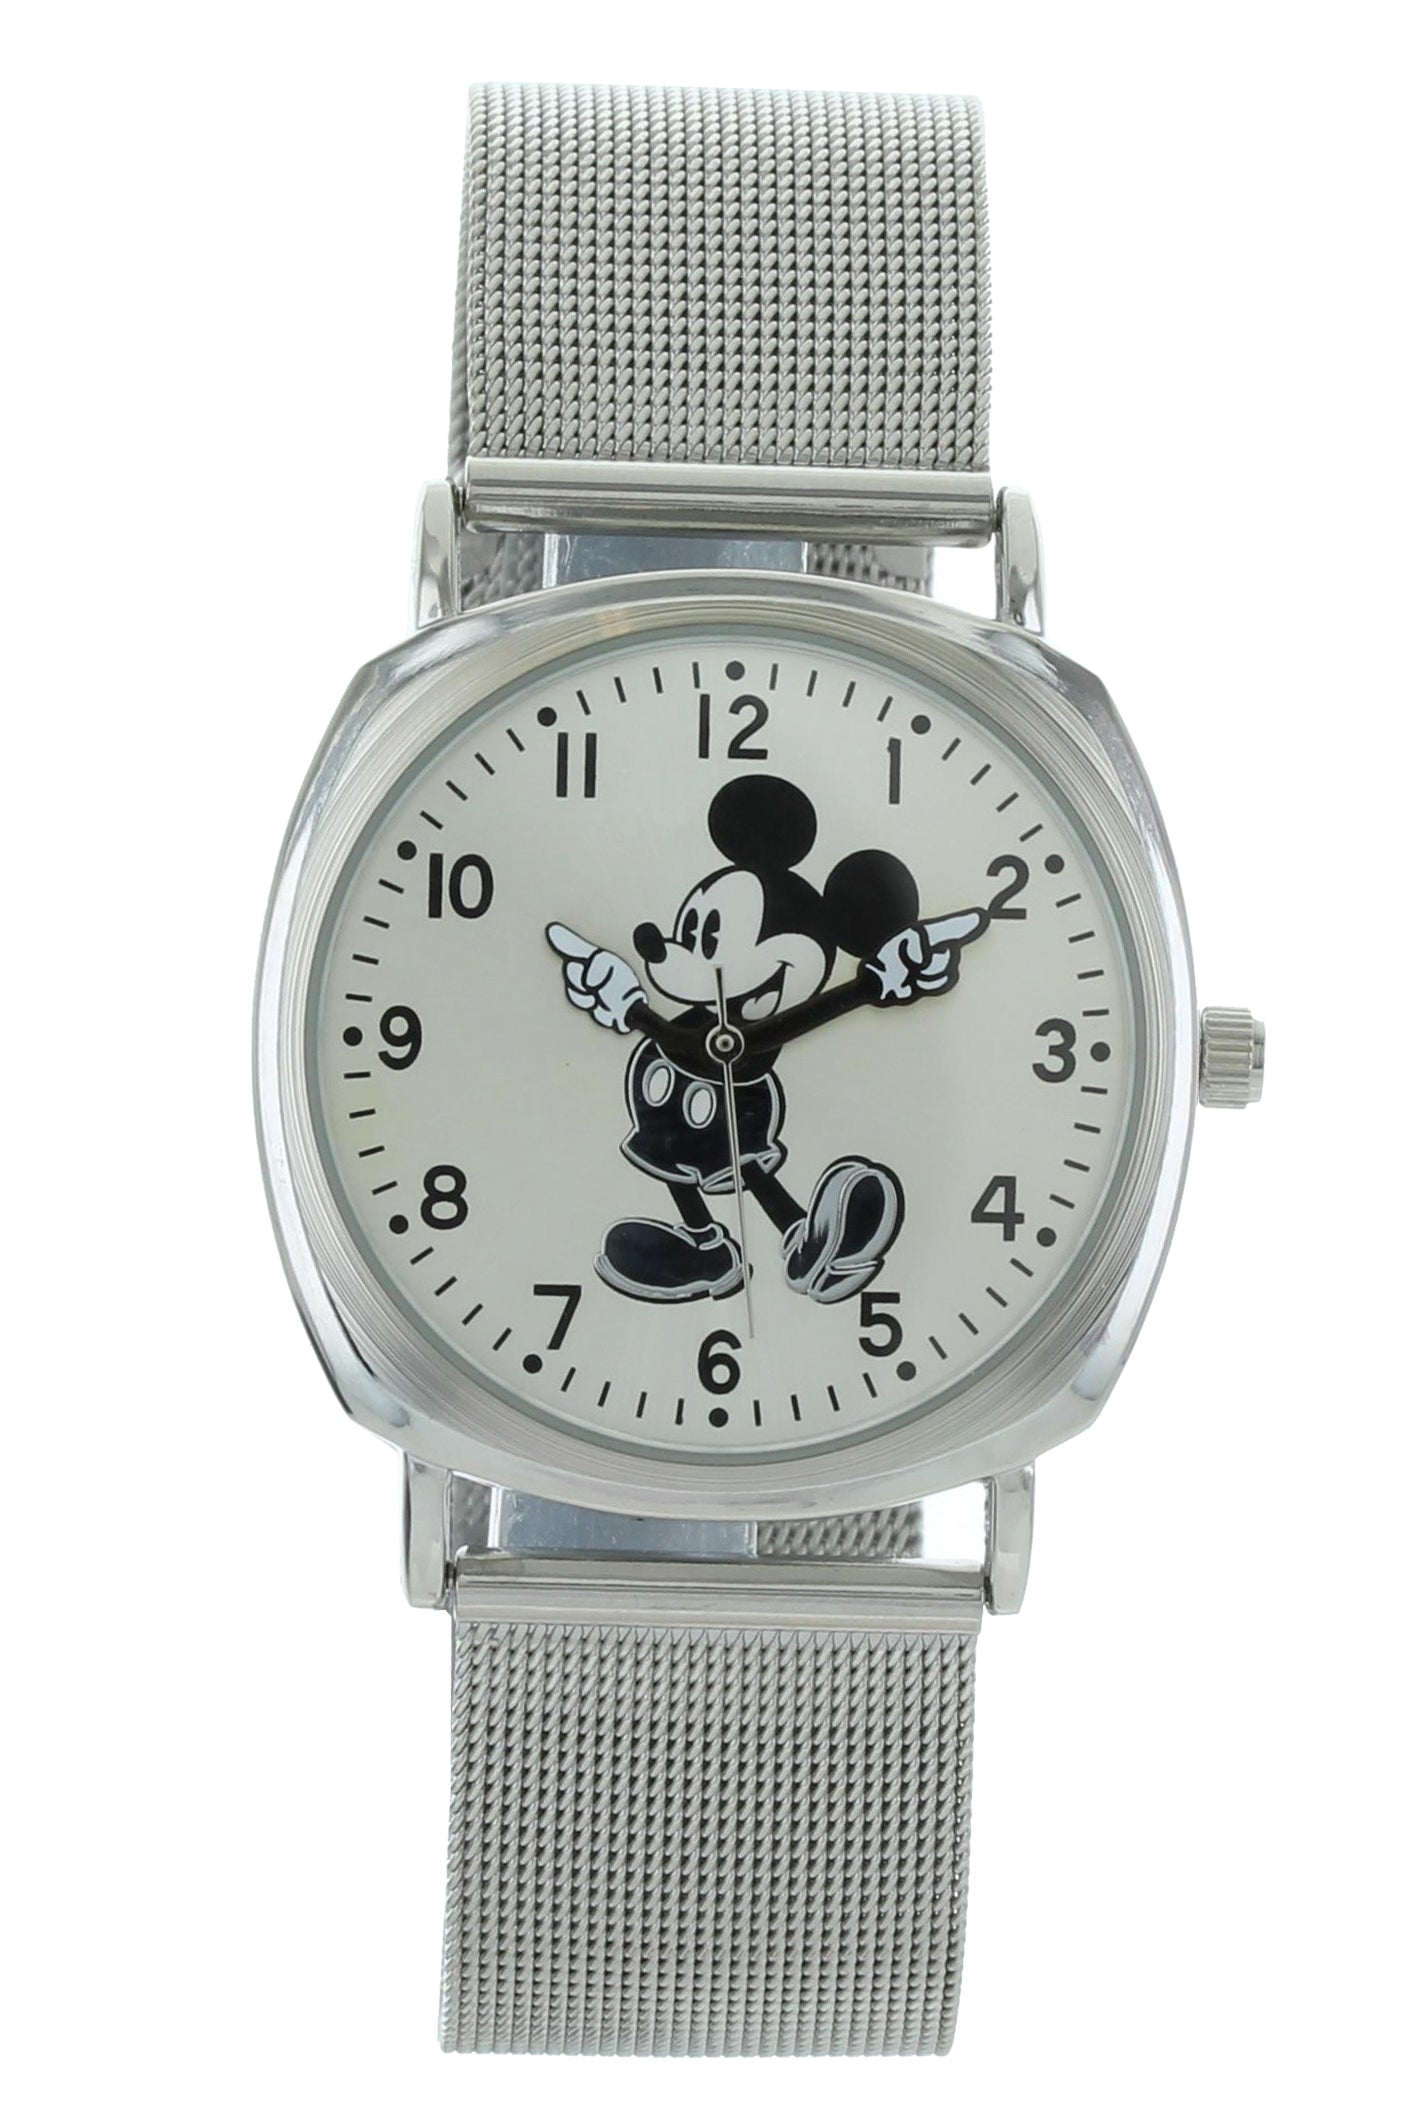 Model: Charming Disney Unisex Mickey Mouse Analog Watch with Silver Tone Mesh Band